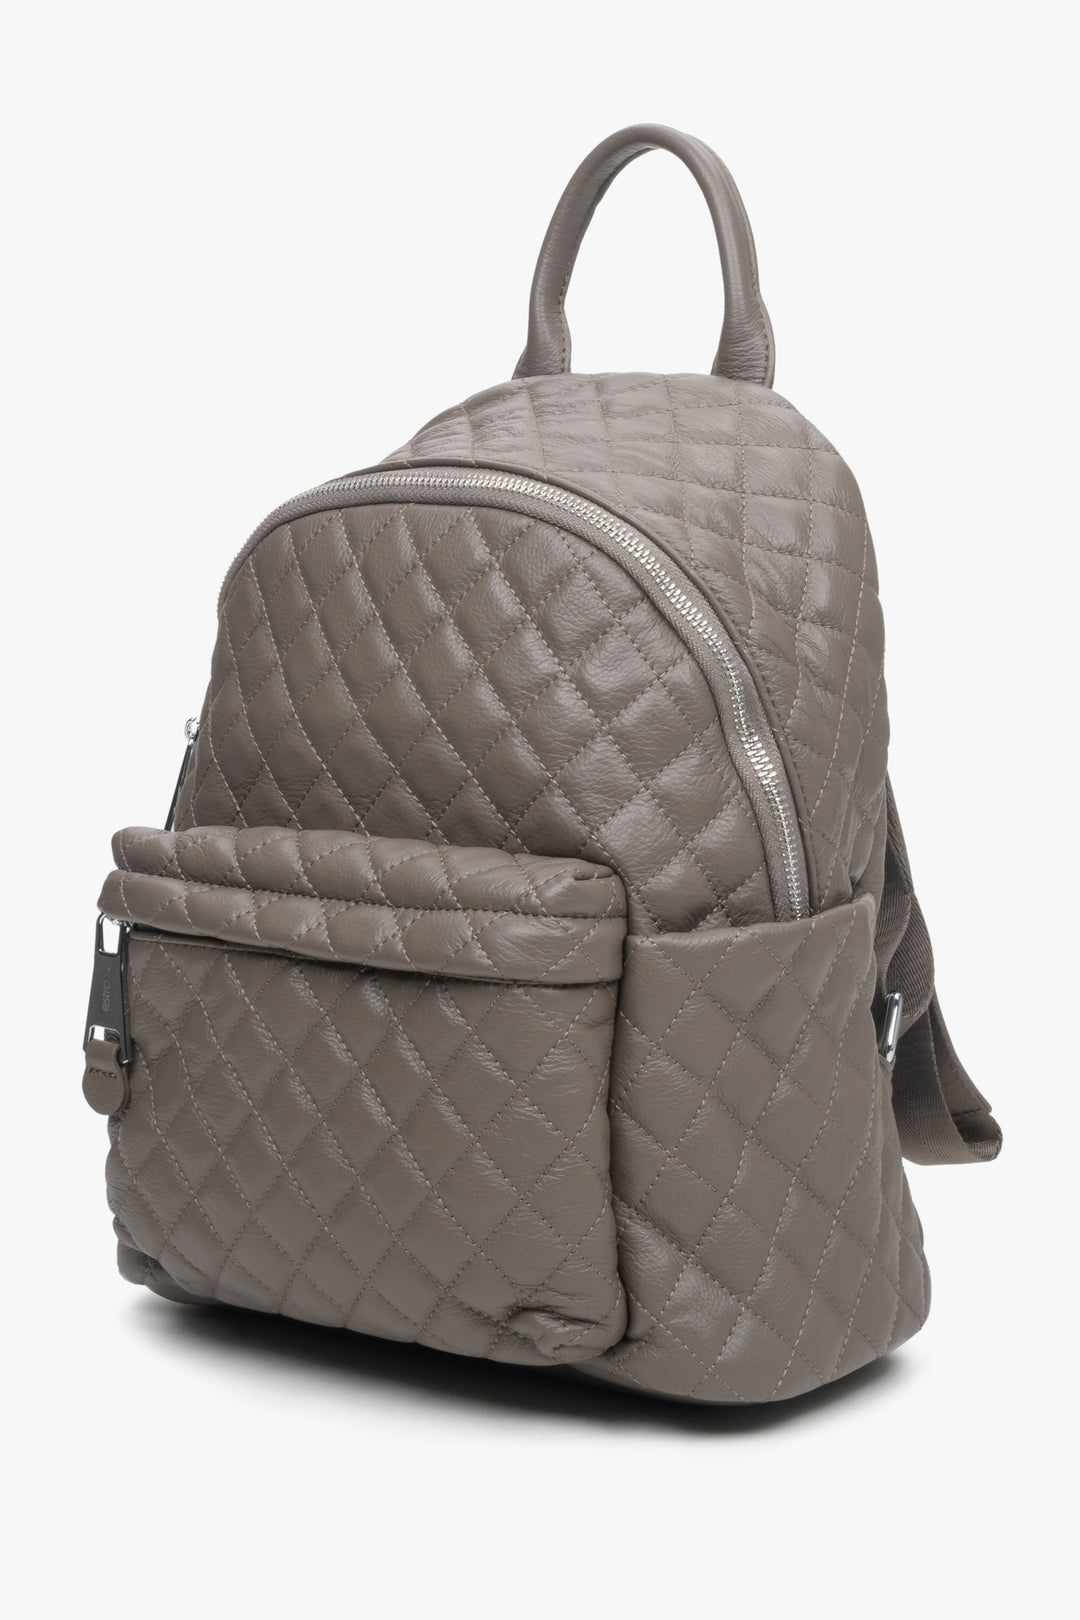 Dark grey quilted leather women's backpack by Estro - side view of the model.